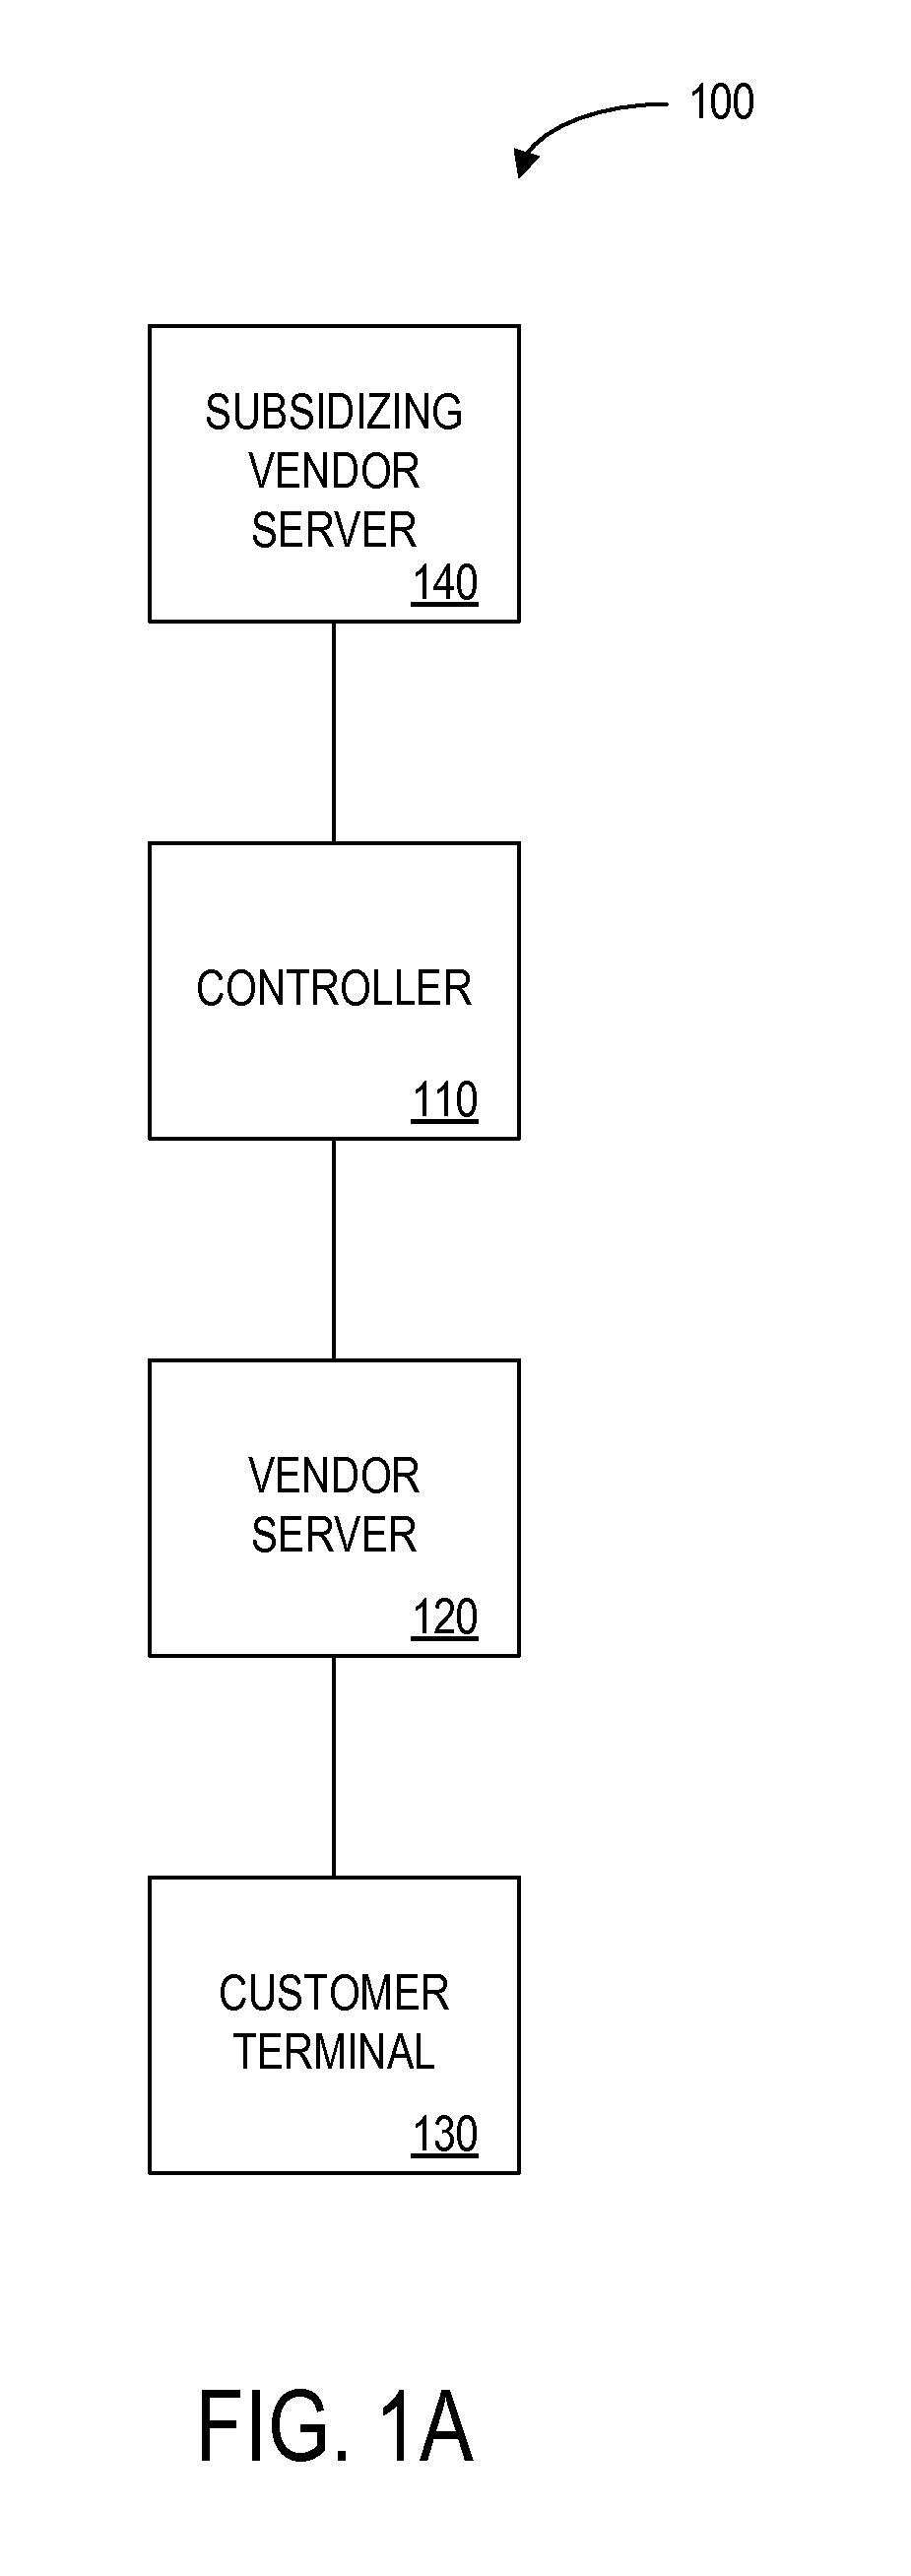 Method and apparatus for providing cross-benefits based on a customer activity